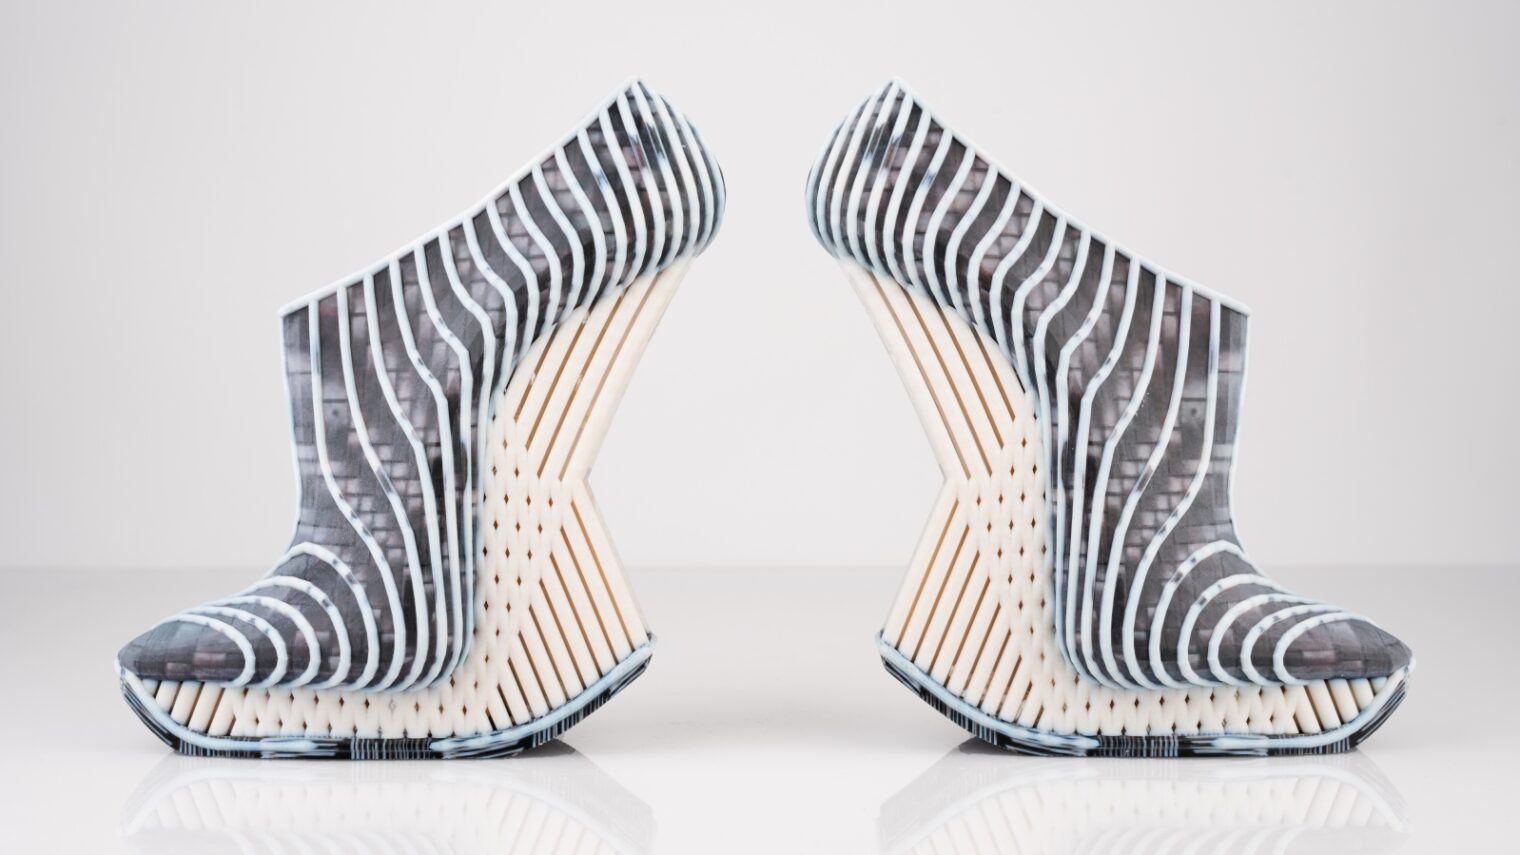 Ganit Goldstein designed and 3D-printed these shoes that are now in the permanent collection of the Design Museum in Holon, Israel. Photo: courtesy